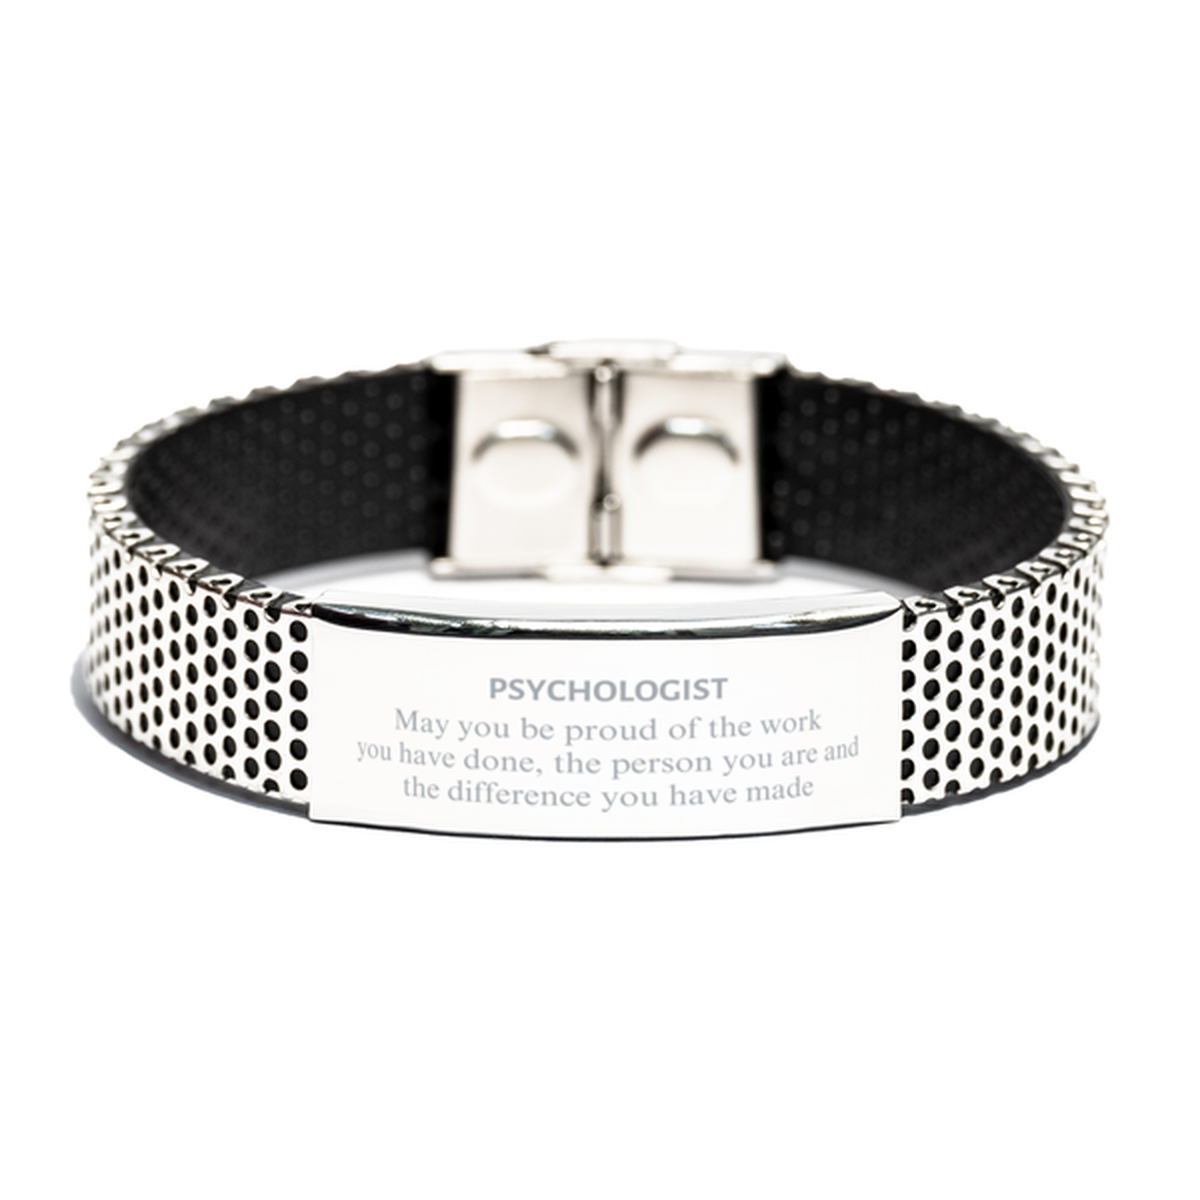 Psychologist May you be proud of the work you have done, Retirement Psychologist Stainless Steel Bracelet for Colleague Appreciation Gifts Amazing for Psychologist